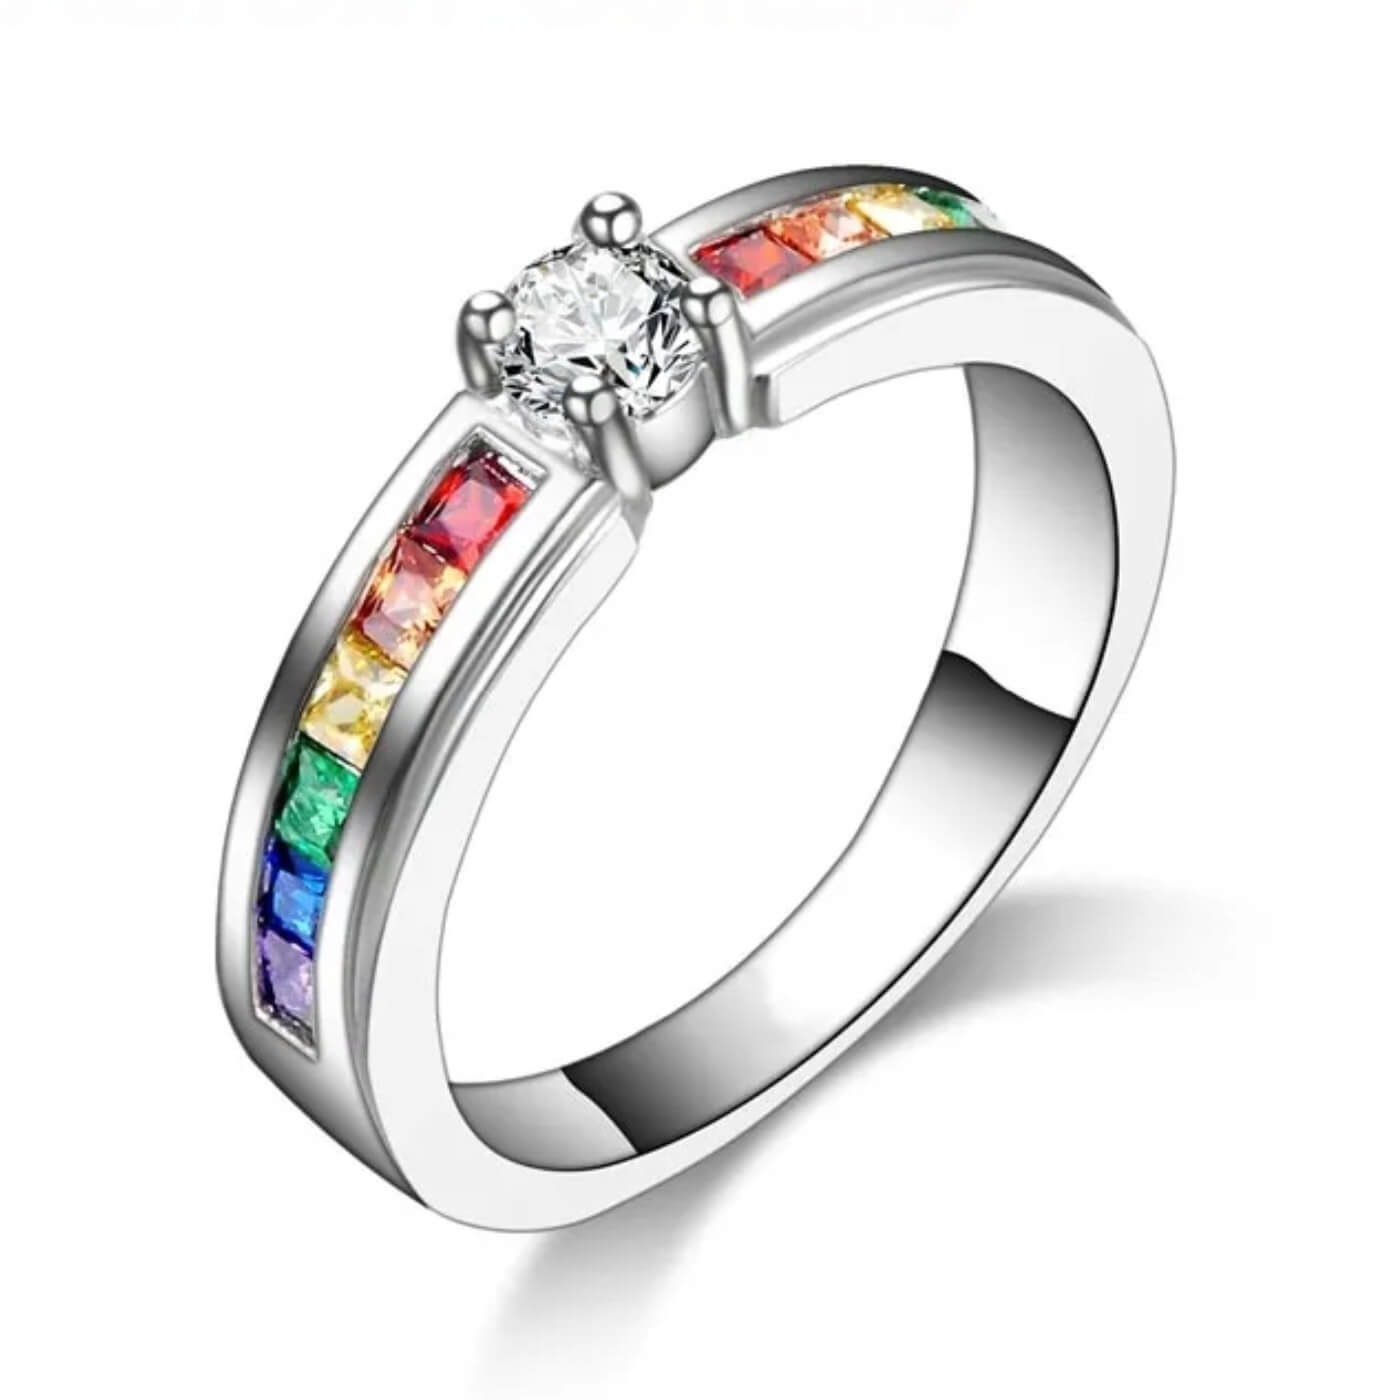 Ring made with rainbow cubic zirconia stones